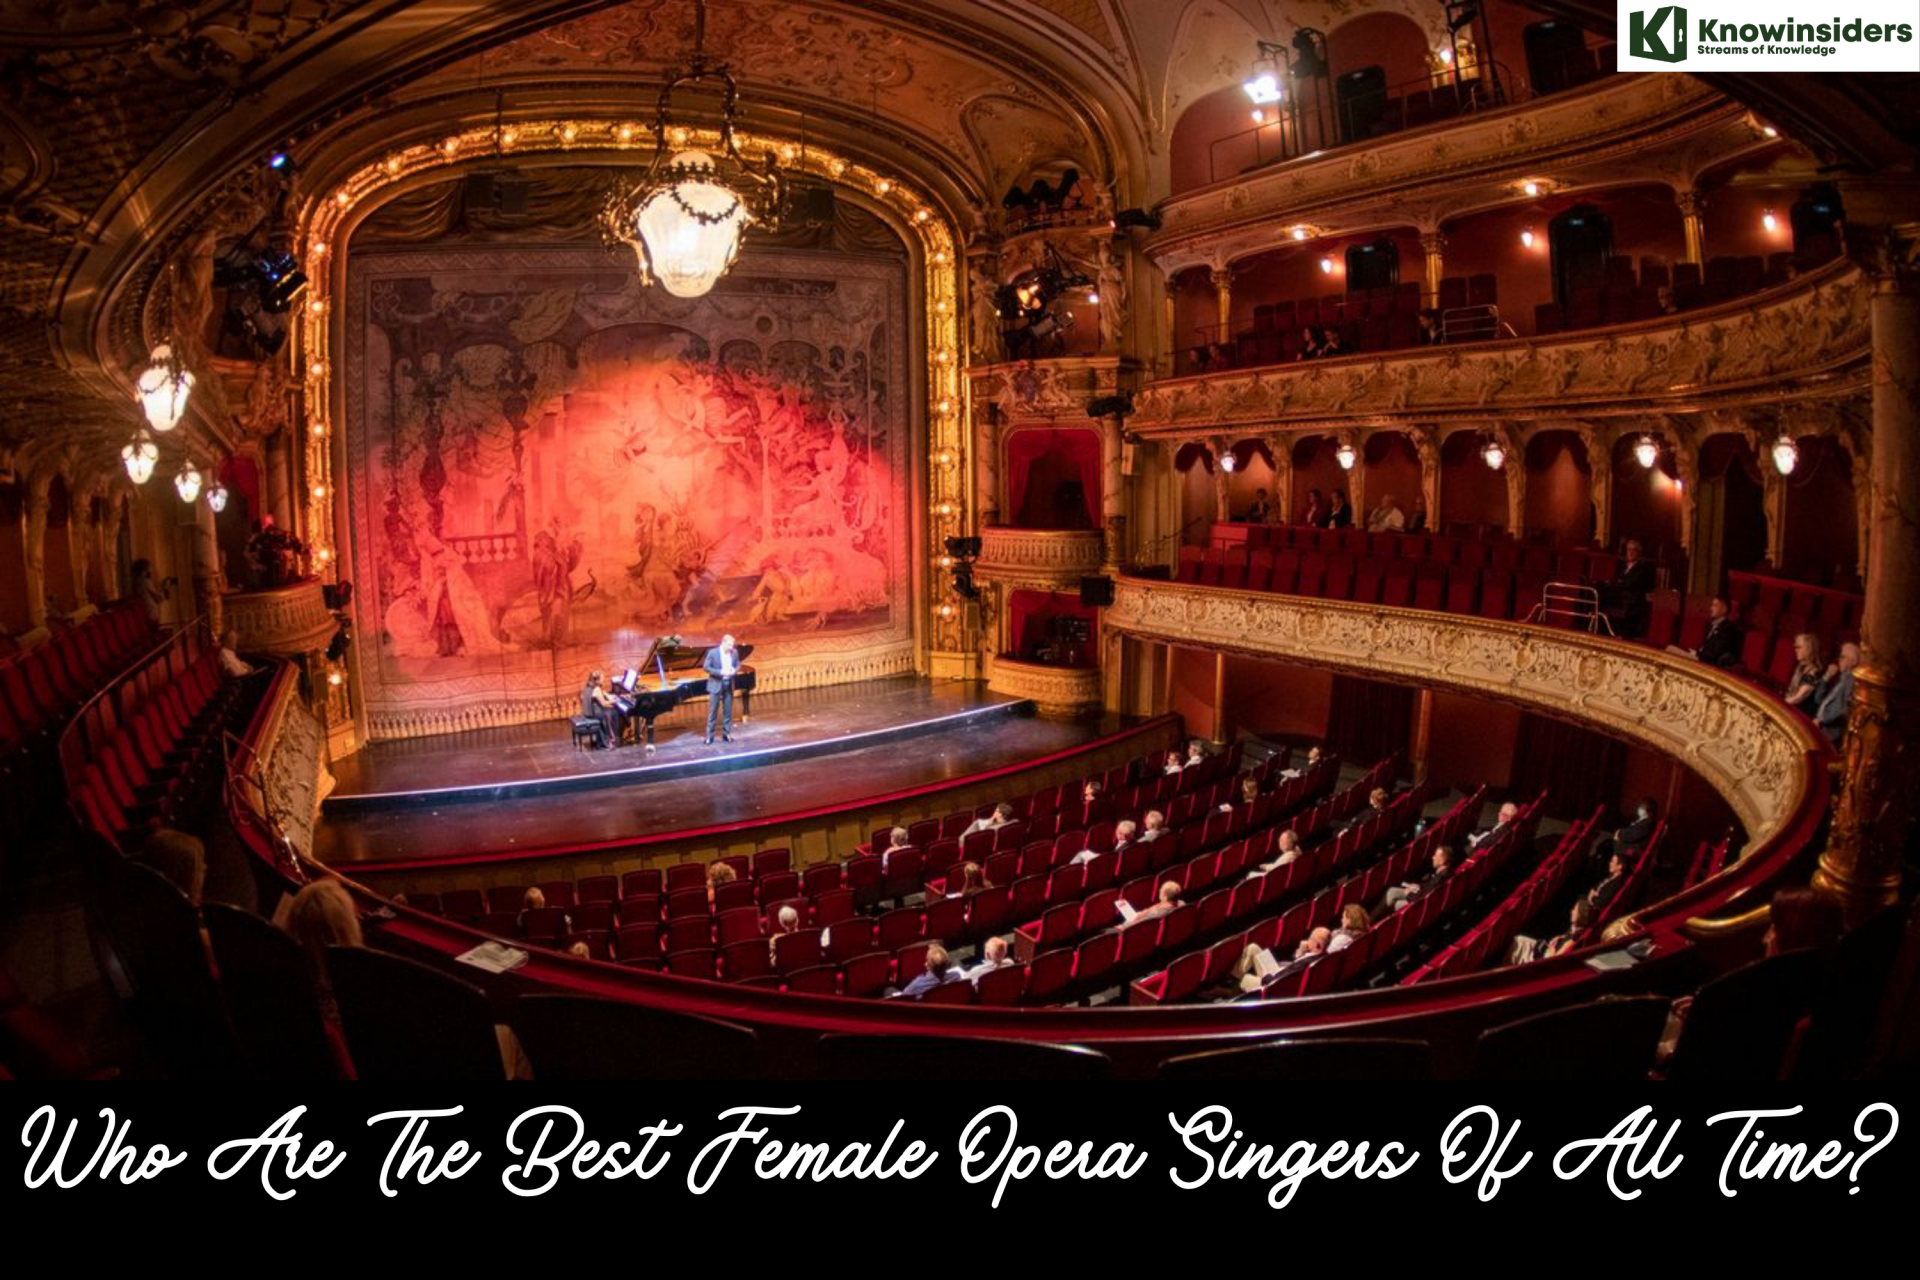 Top 10 Best Female Opera Singers Of All Time